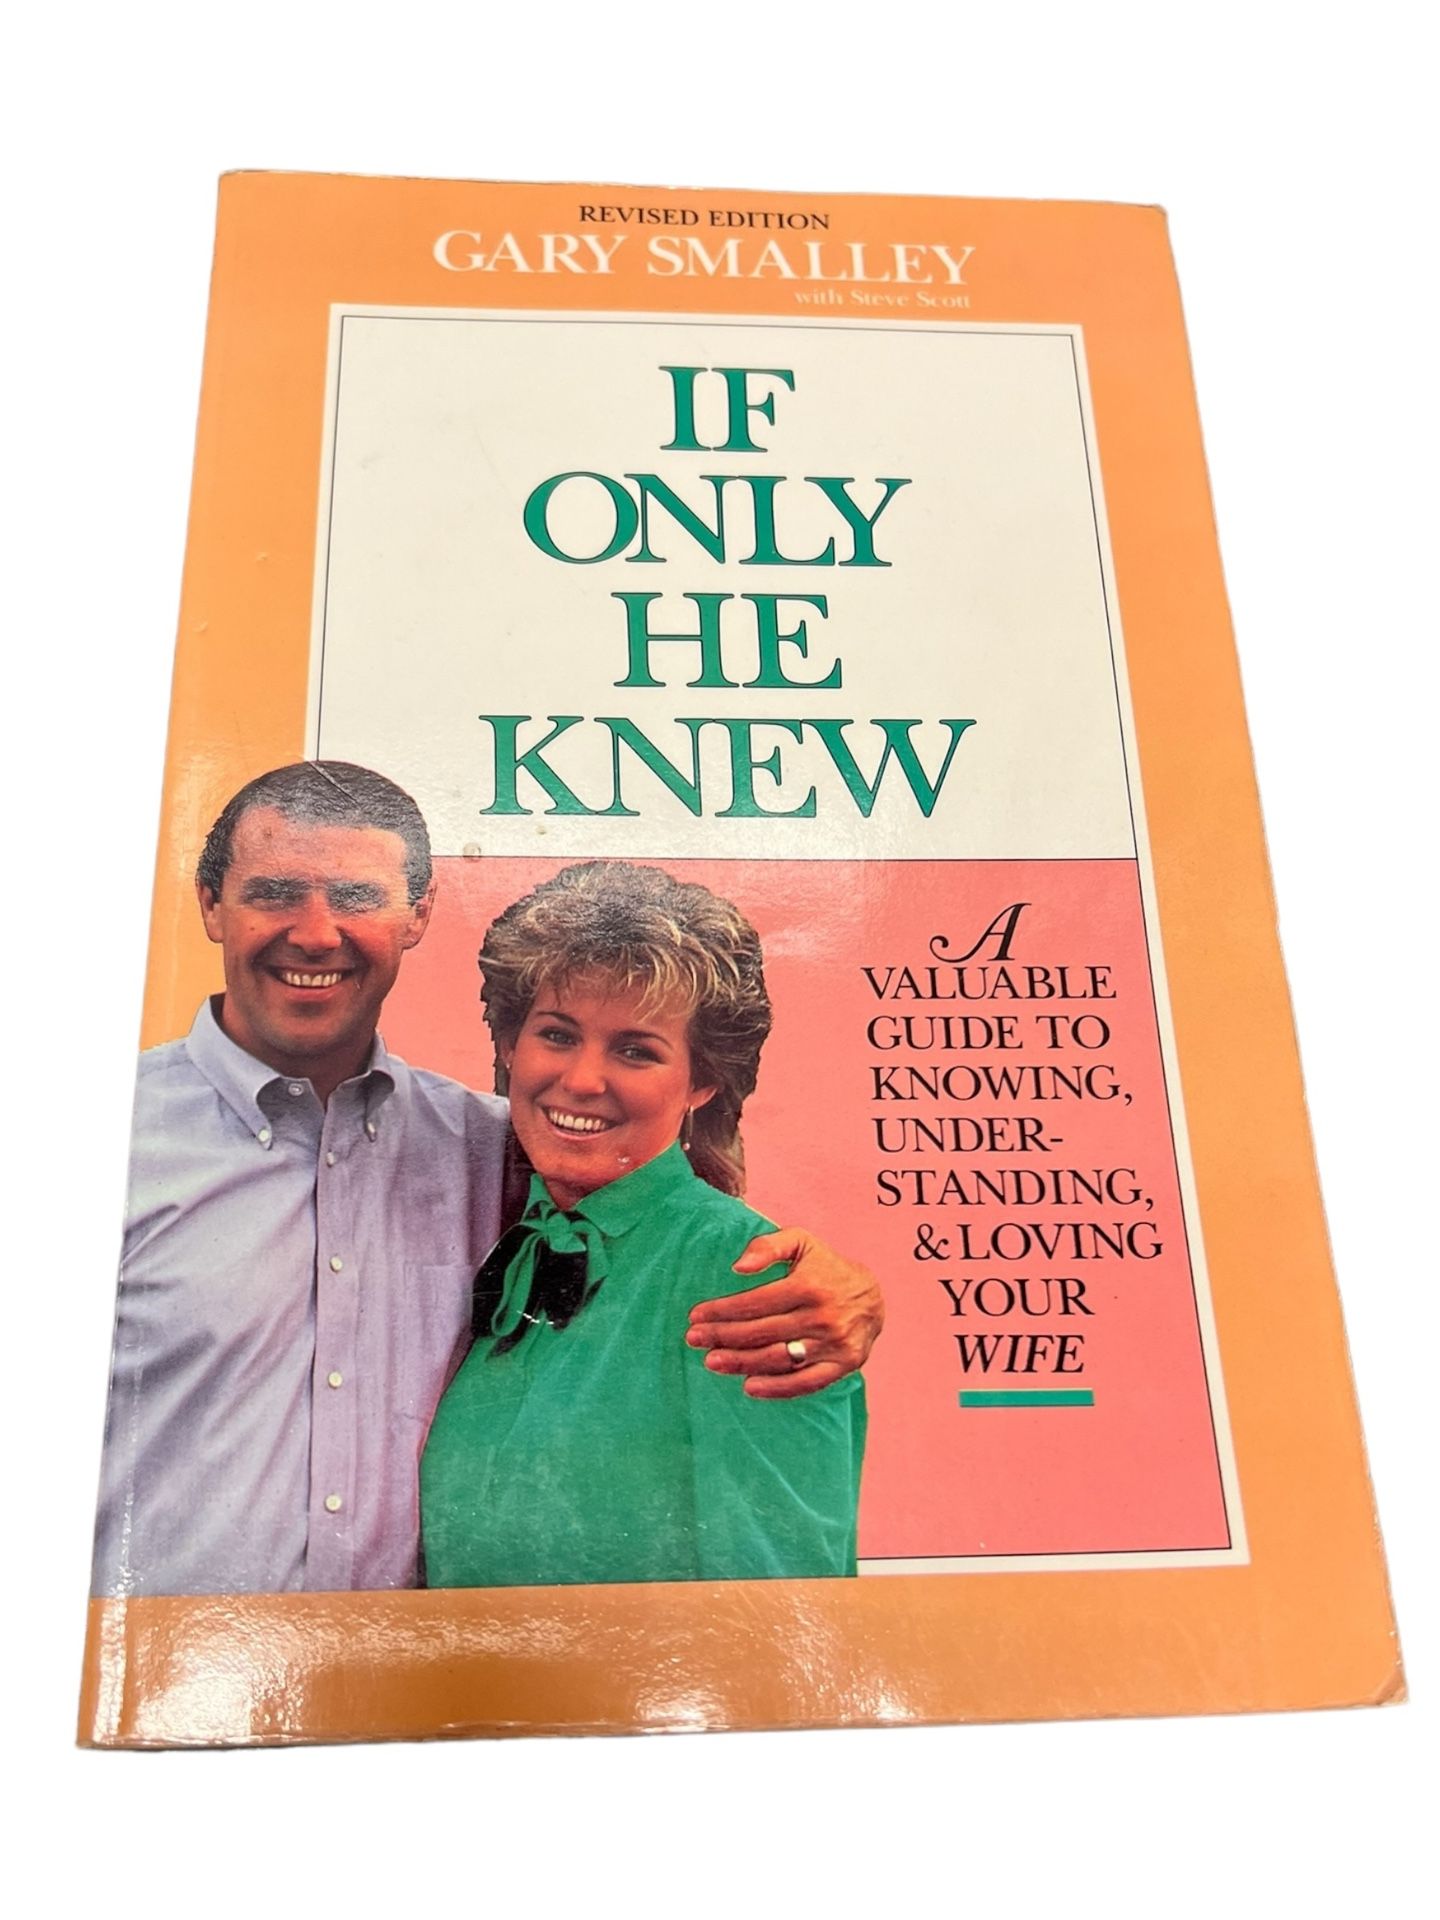 IF ONLY HE KNEW  by Gary Smalley Book   This book titled "IF ONLY HE KNEW" by Gary Smalley is a great resource for anyone interested in improving thei